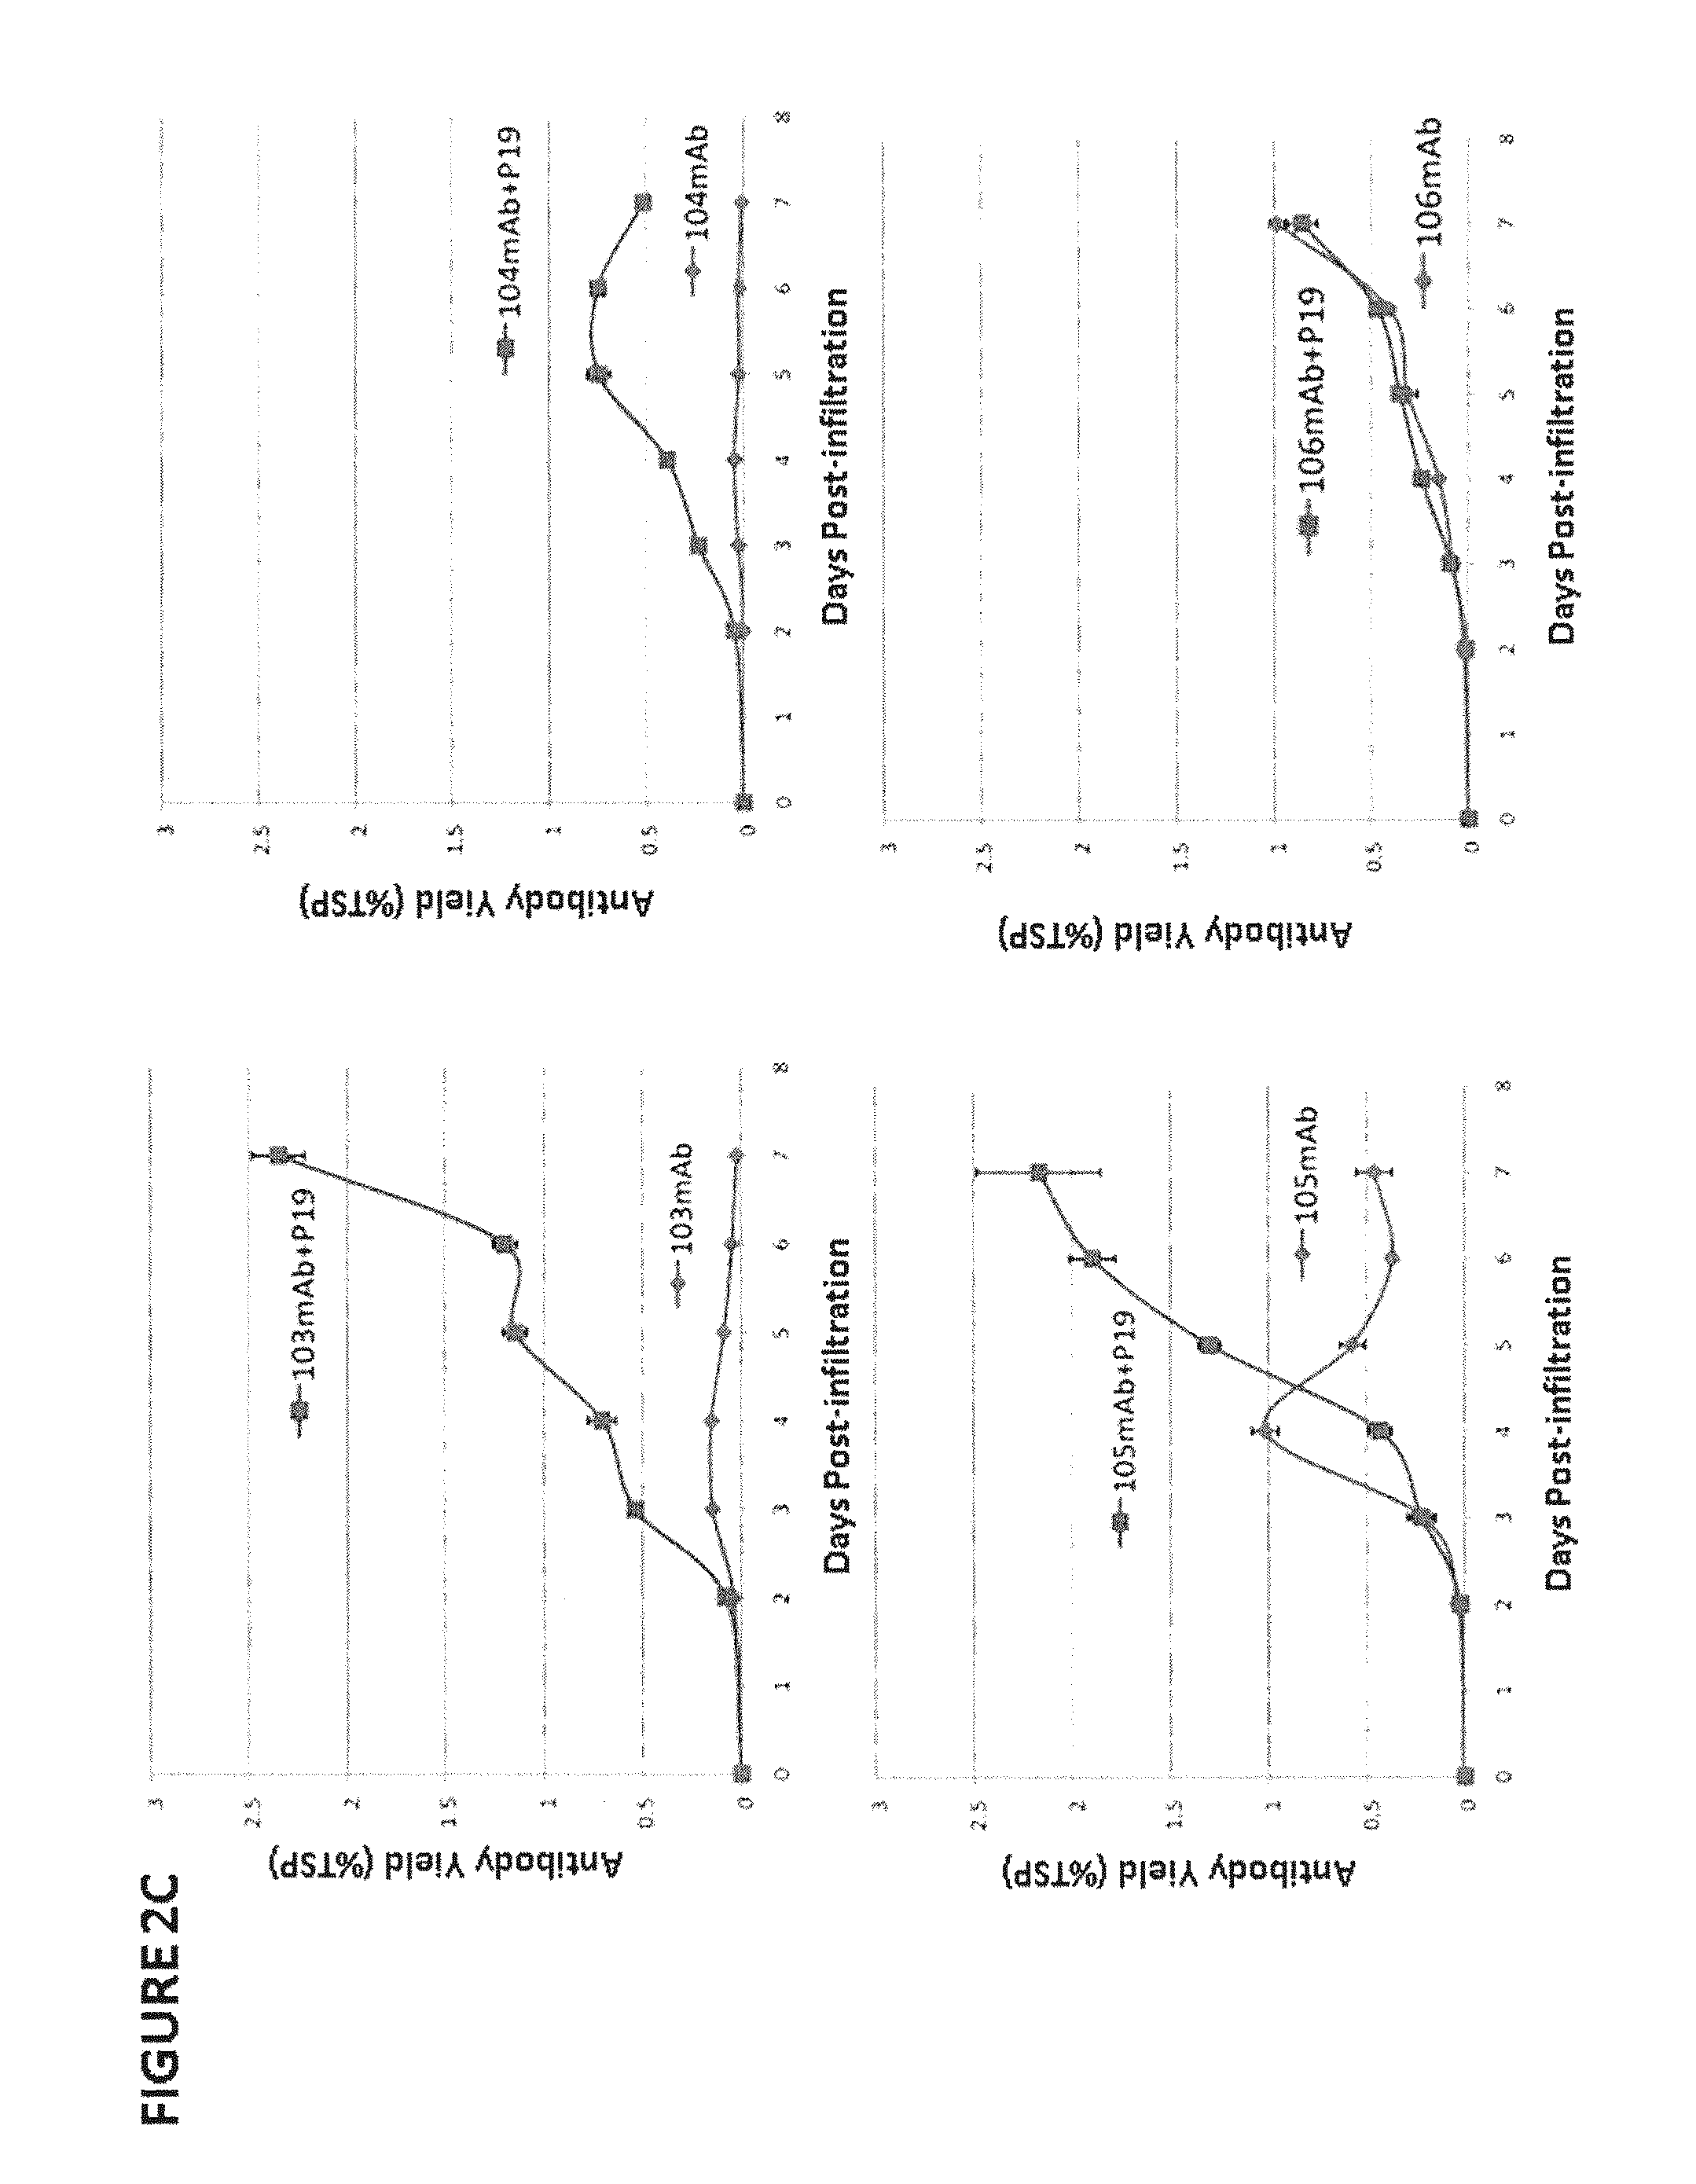 Vectors and Methods For Enhancing Recombinant Protein Expression in Plants